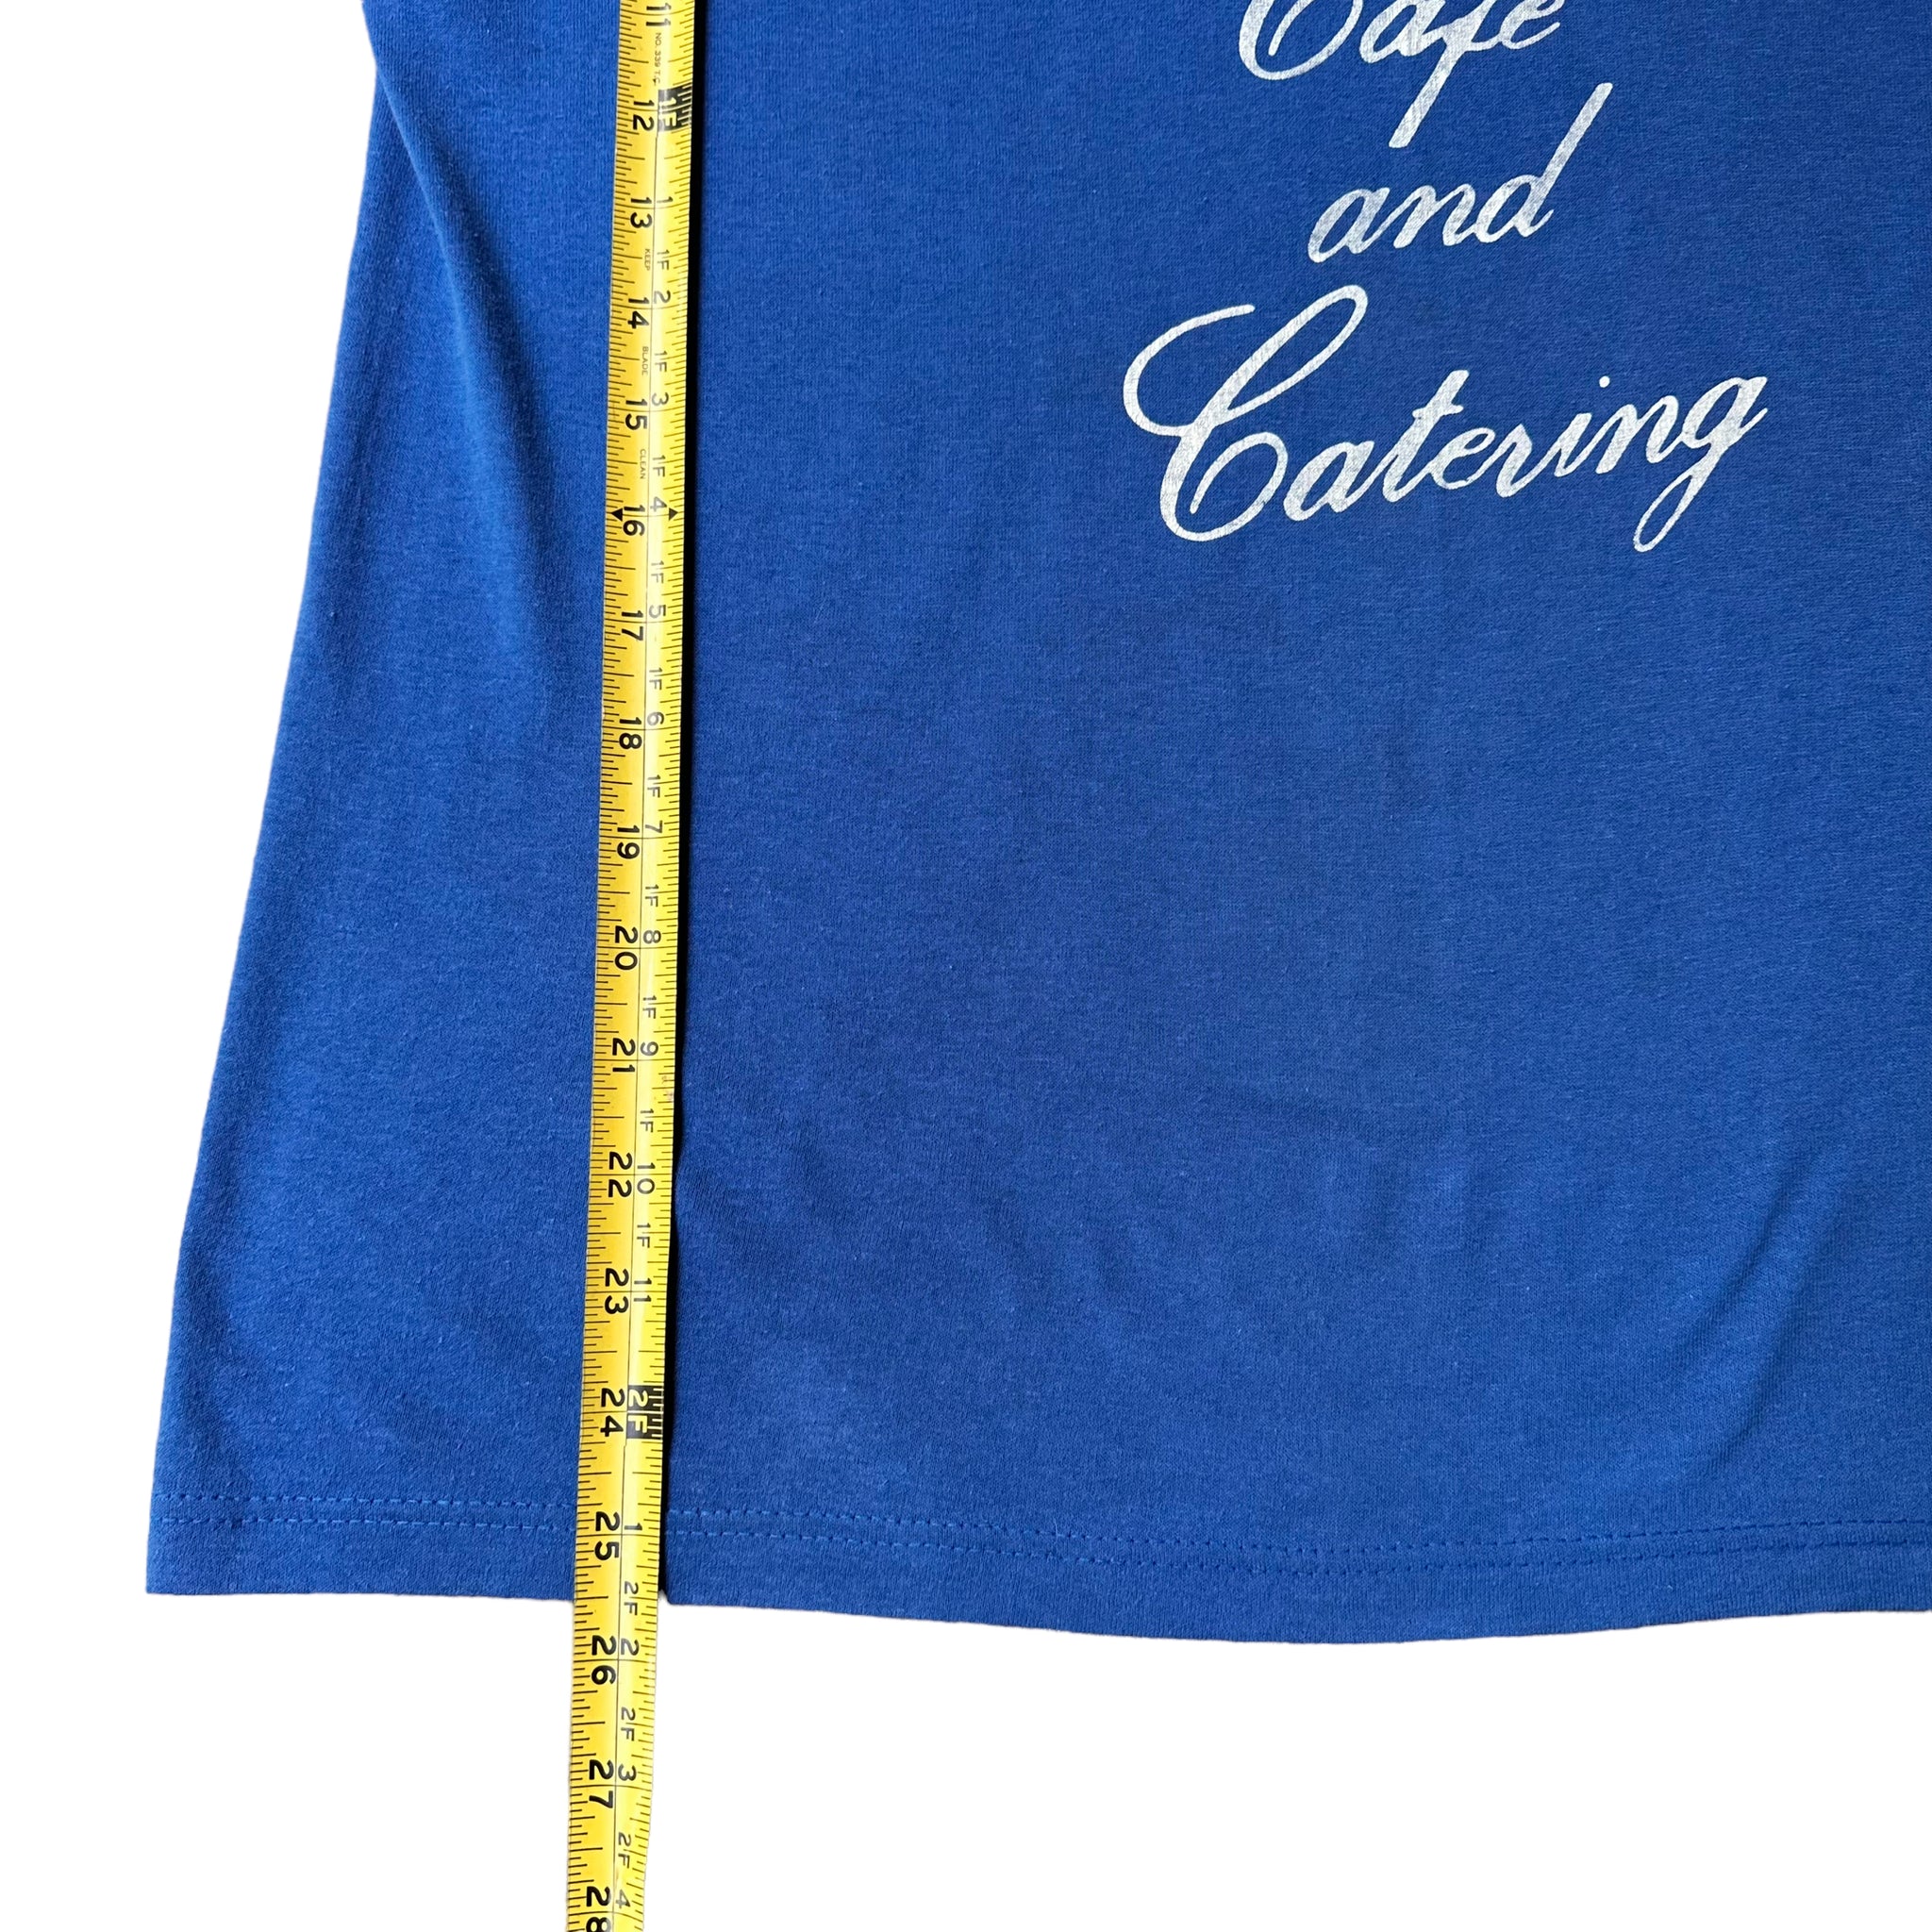 80s Borderline cafe tee small